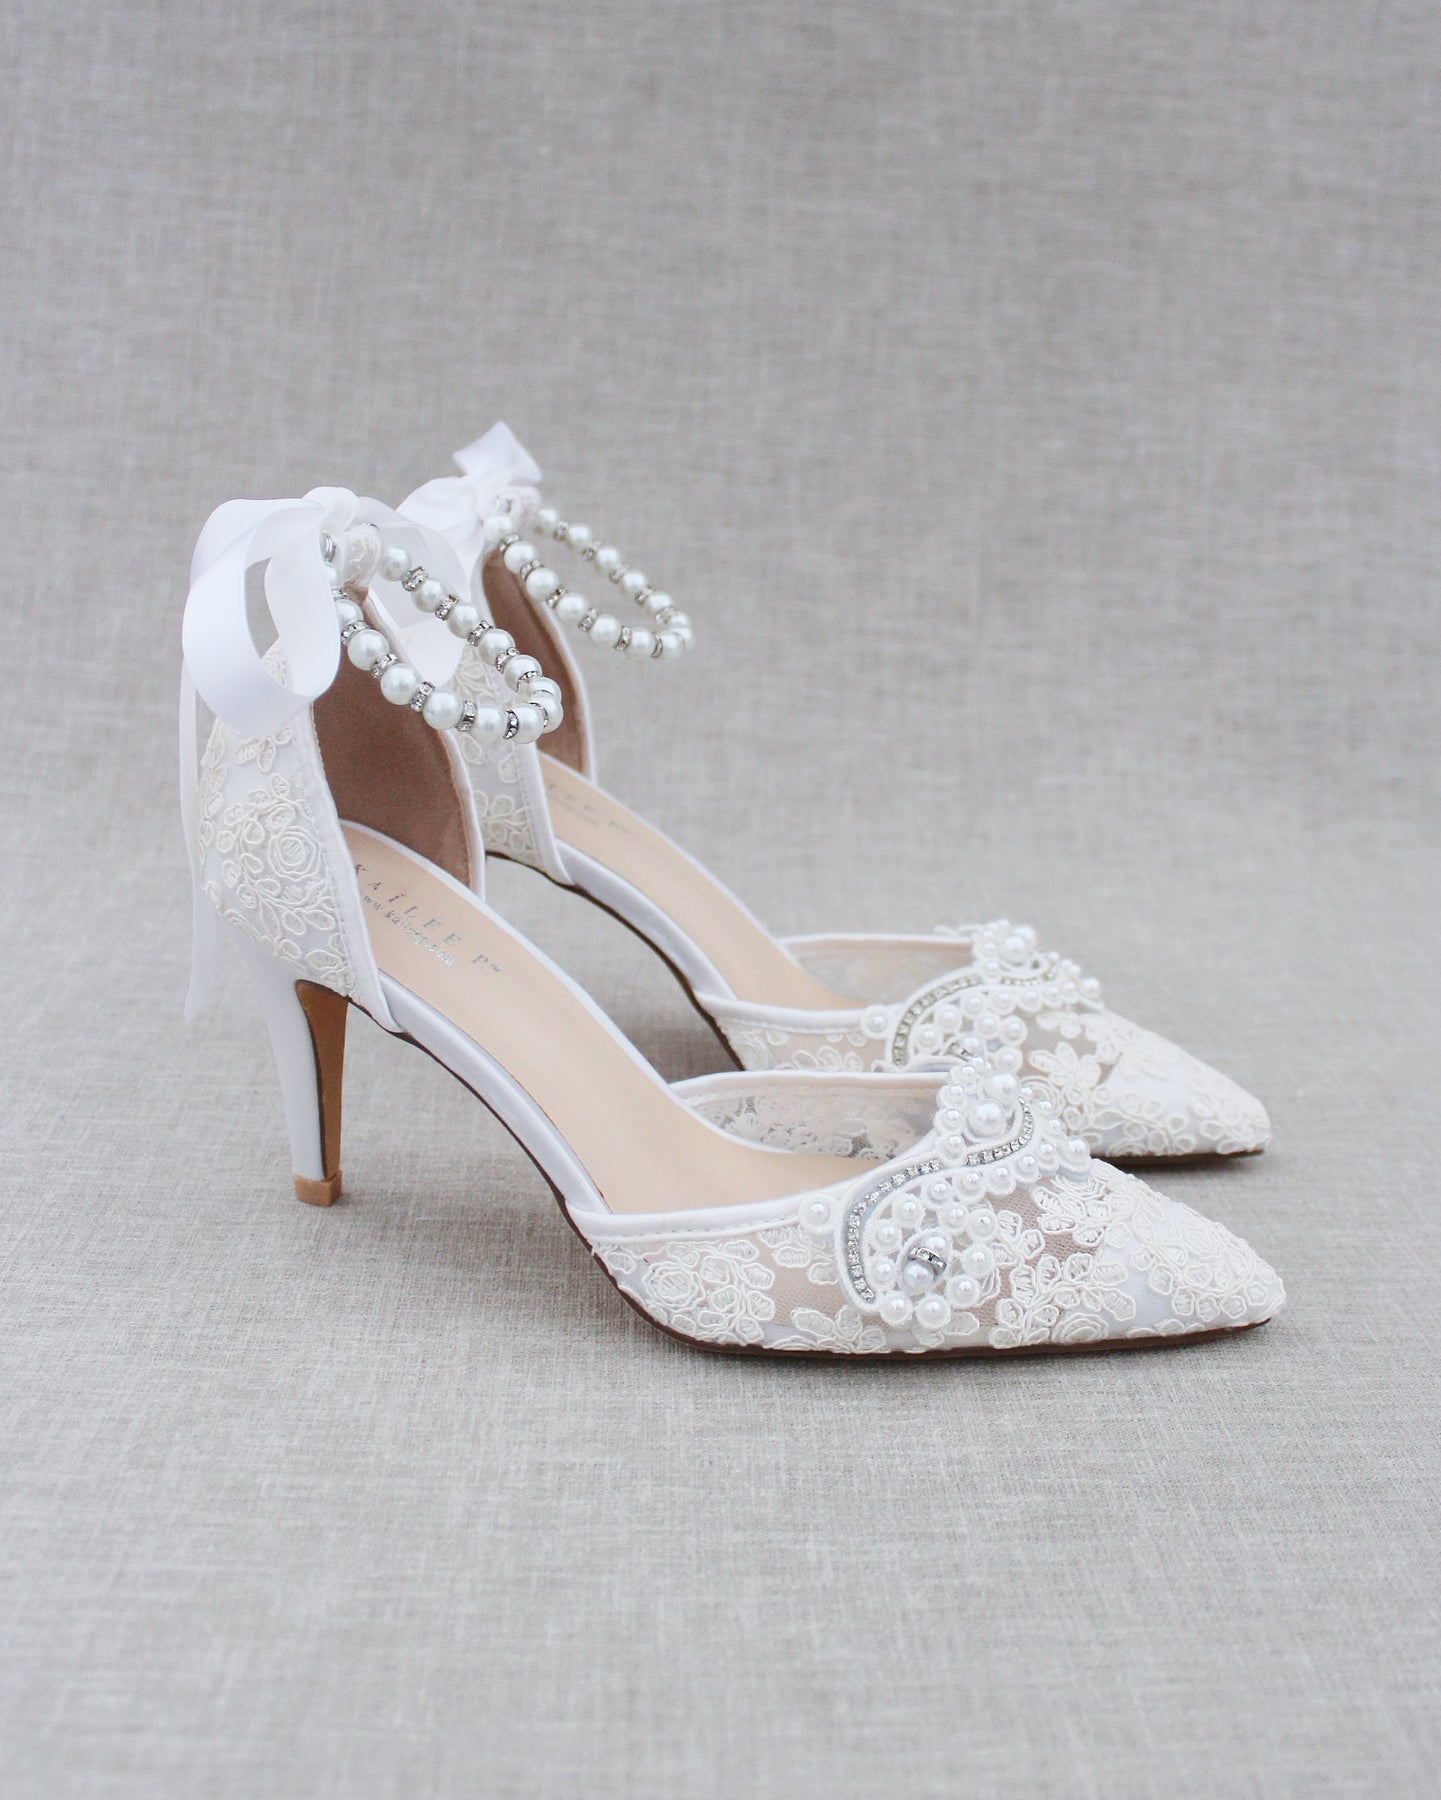 Buy Ivory Lace Bridal Wedding Shoes for Women Comfortable Mid Heel Tie Up  Ankle Strap Pointy Toe Pumps, Ivory White, 9 at Amazon.in